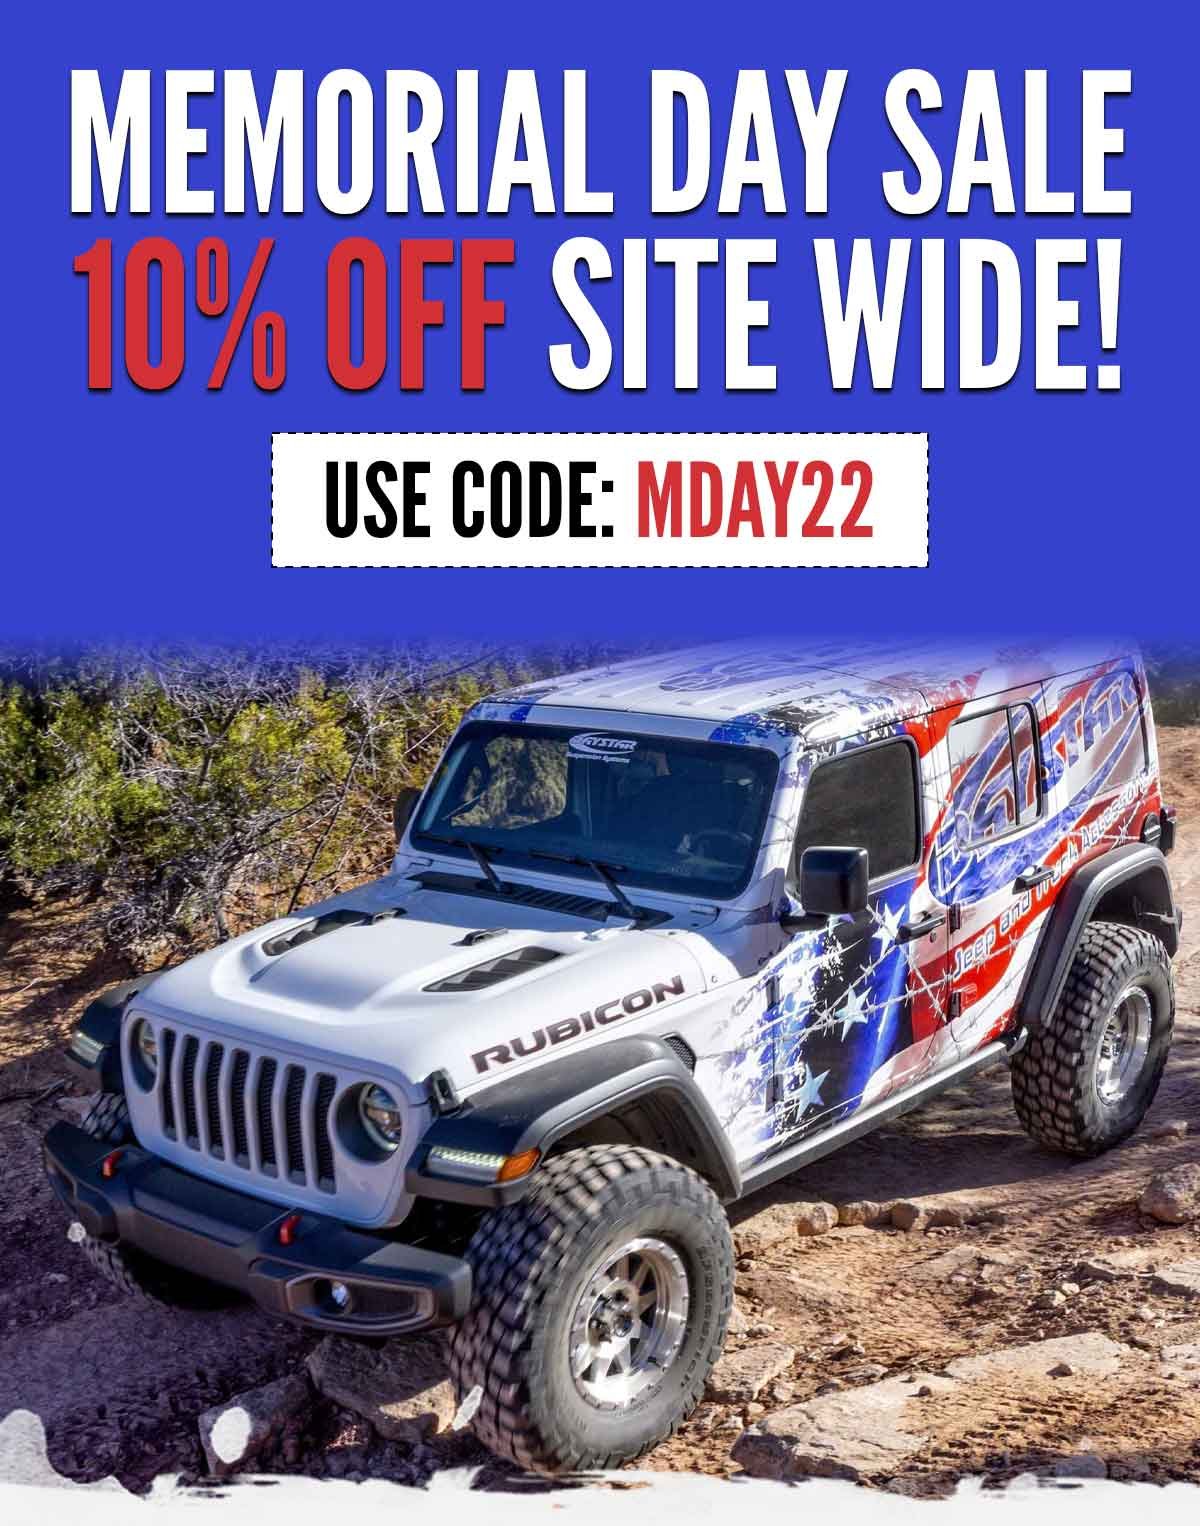 Memorial Day Sale - 10% Off Site Wide! Use Code: MDAY22